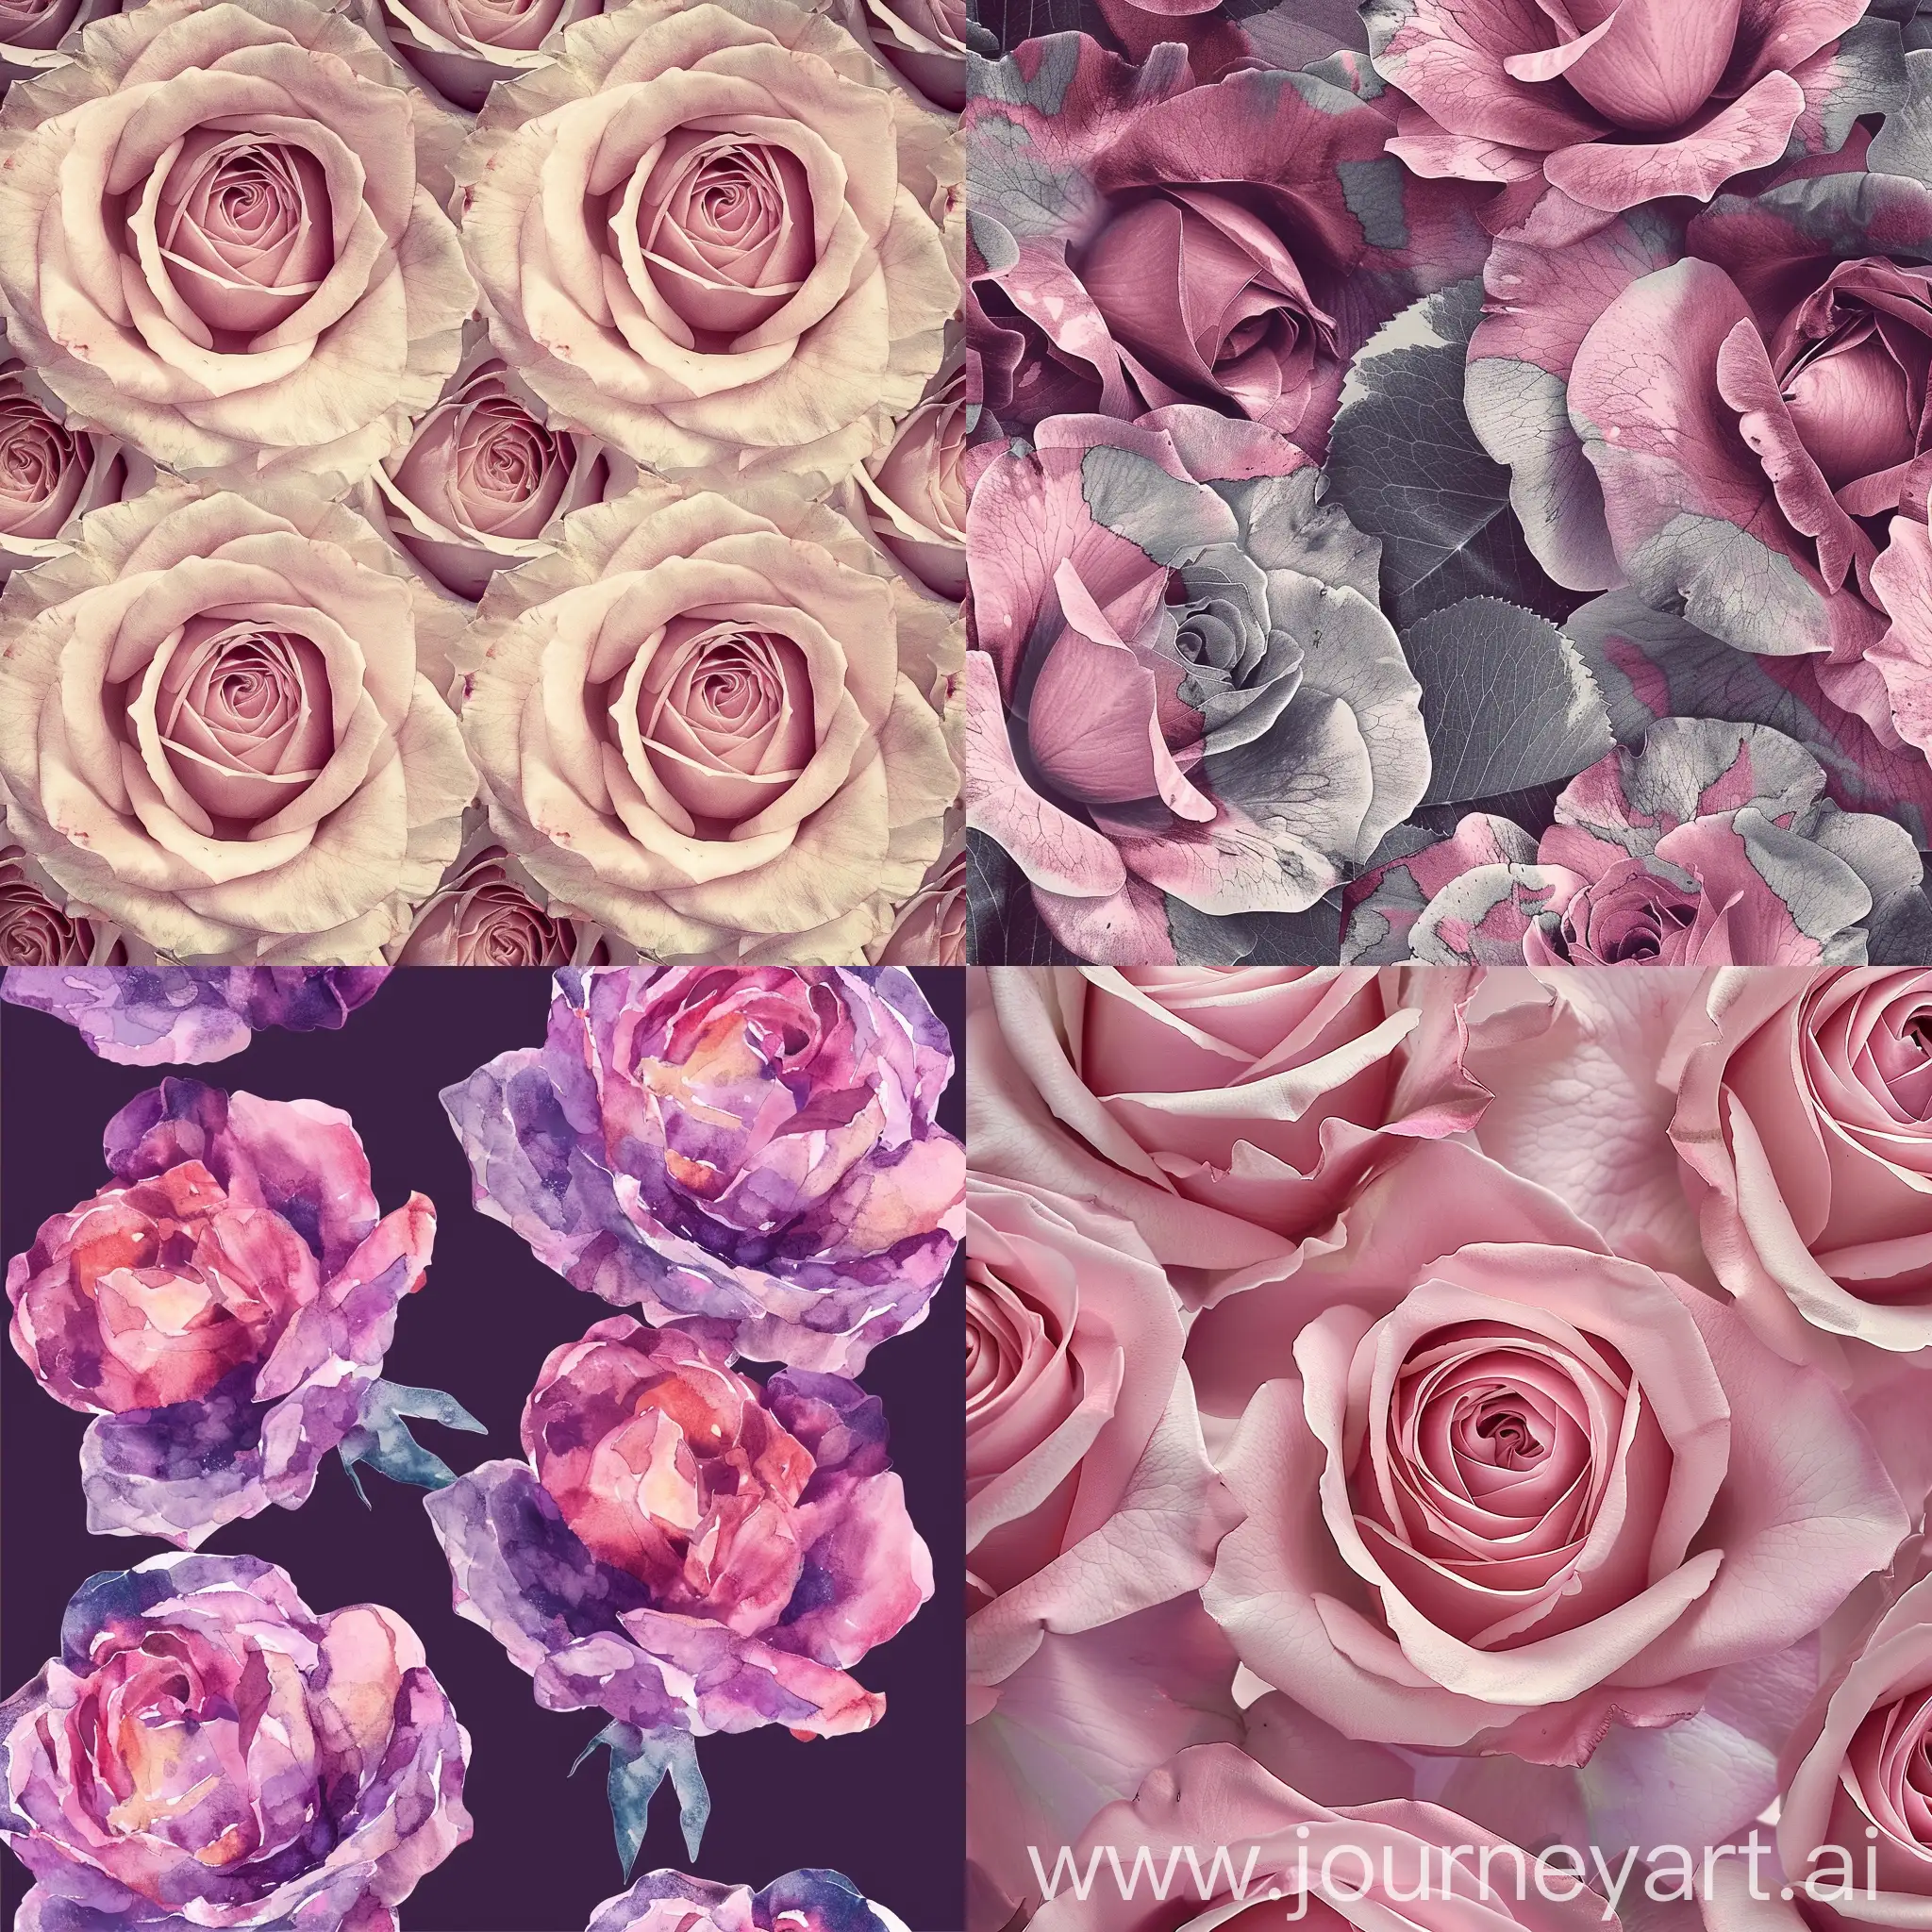 Repetitive-Pattern-of-Roses-in-Vibrant-Colors